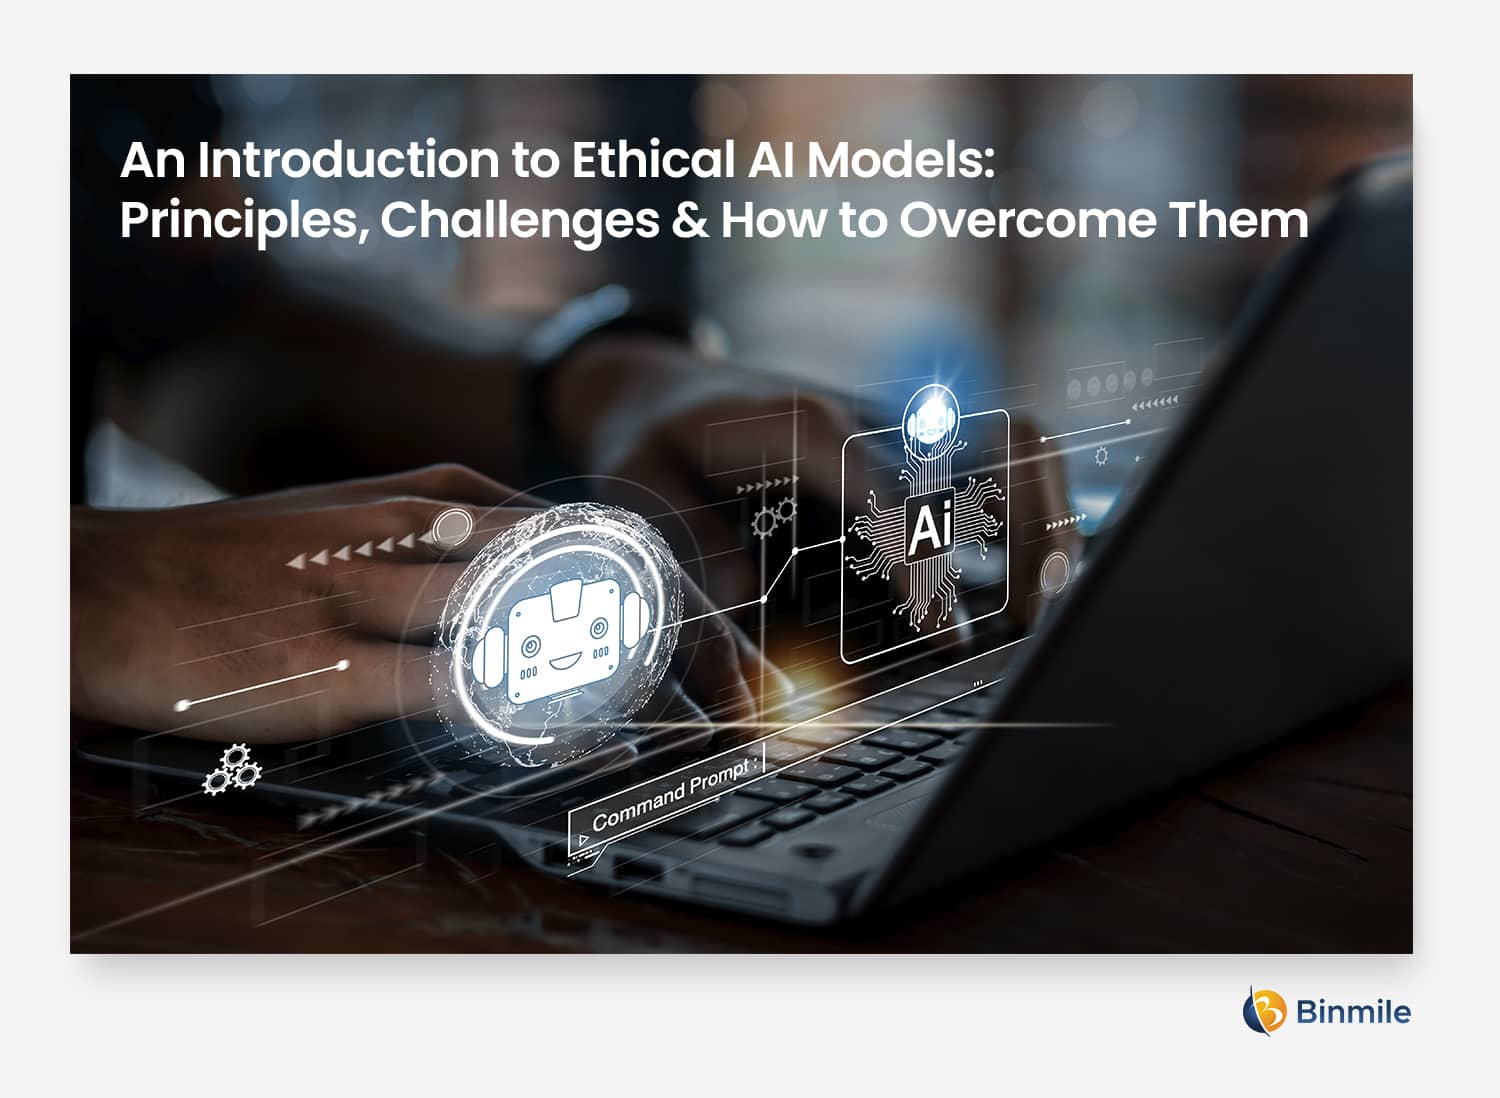 An Introduction to Ethical AI Models | Binmile